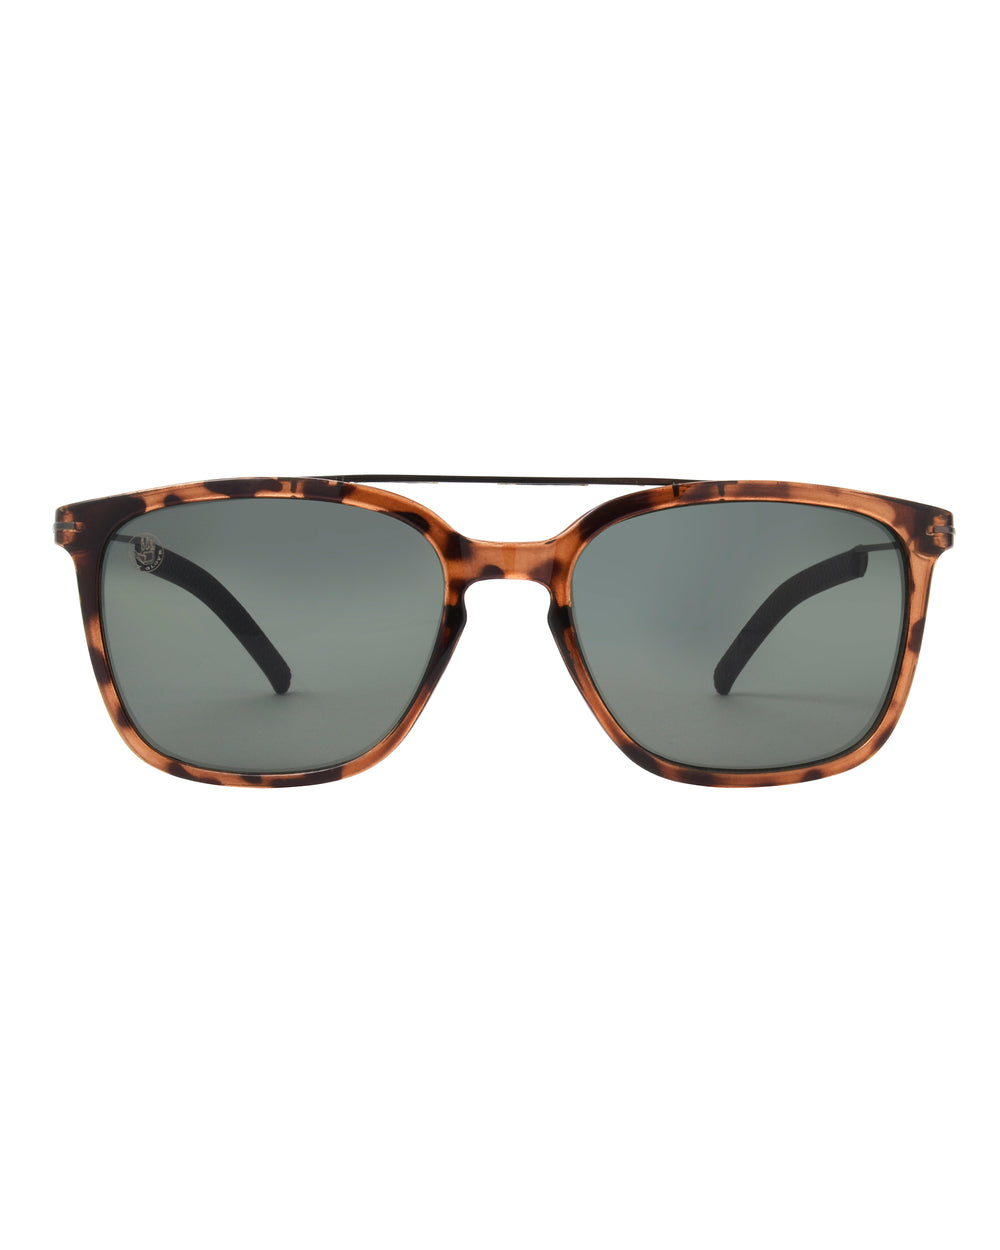 Black Out Square Sunglasses - Brown